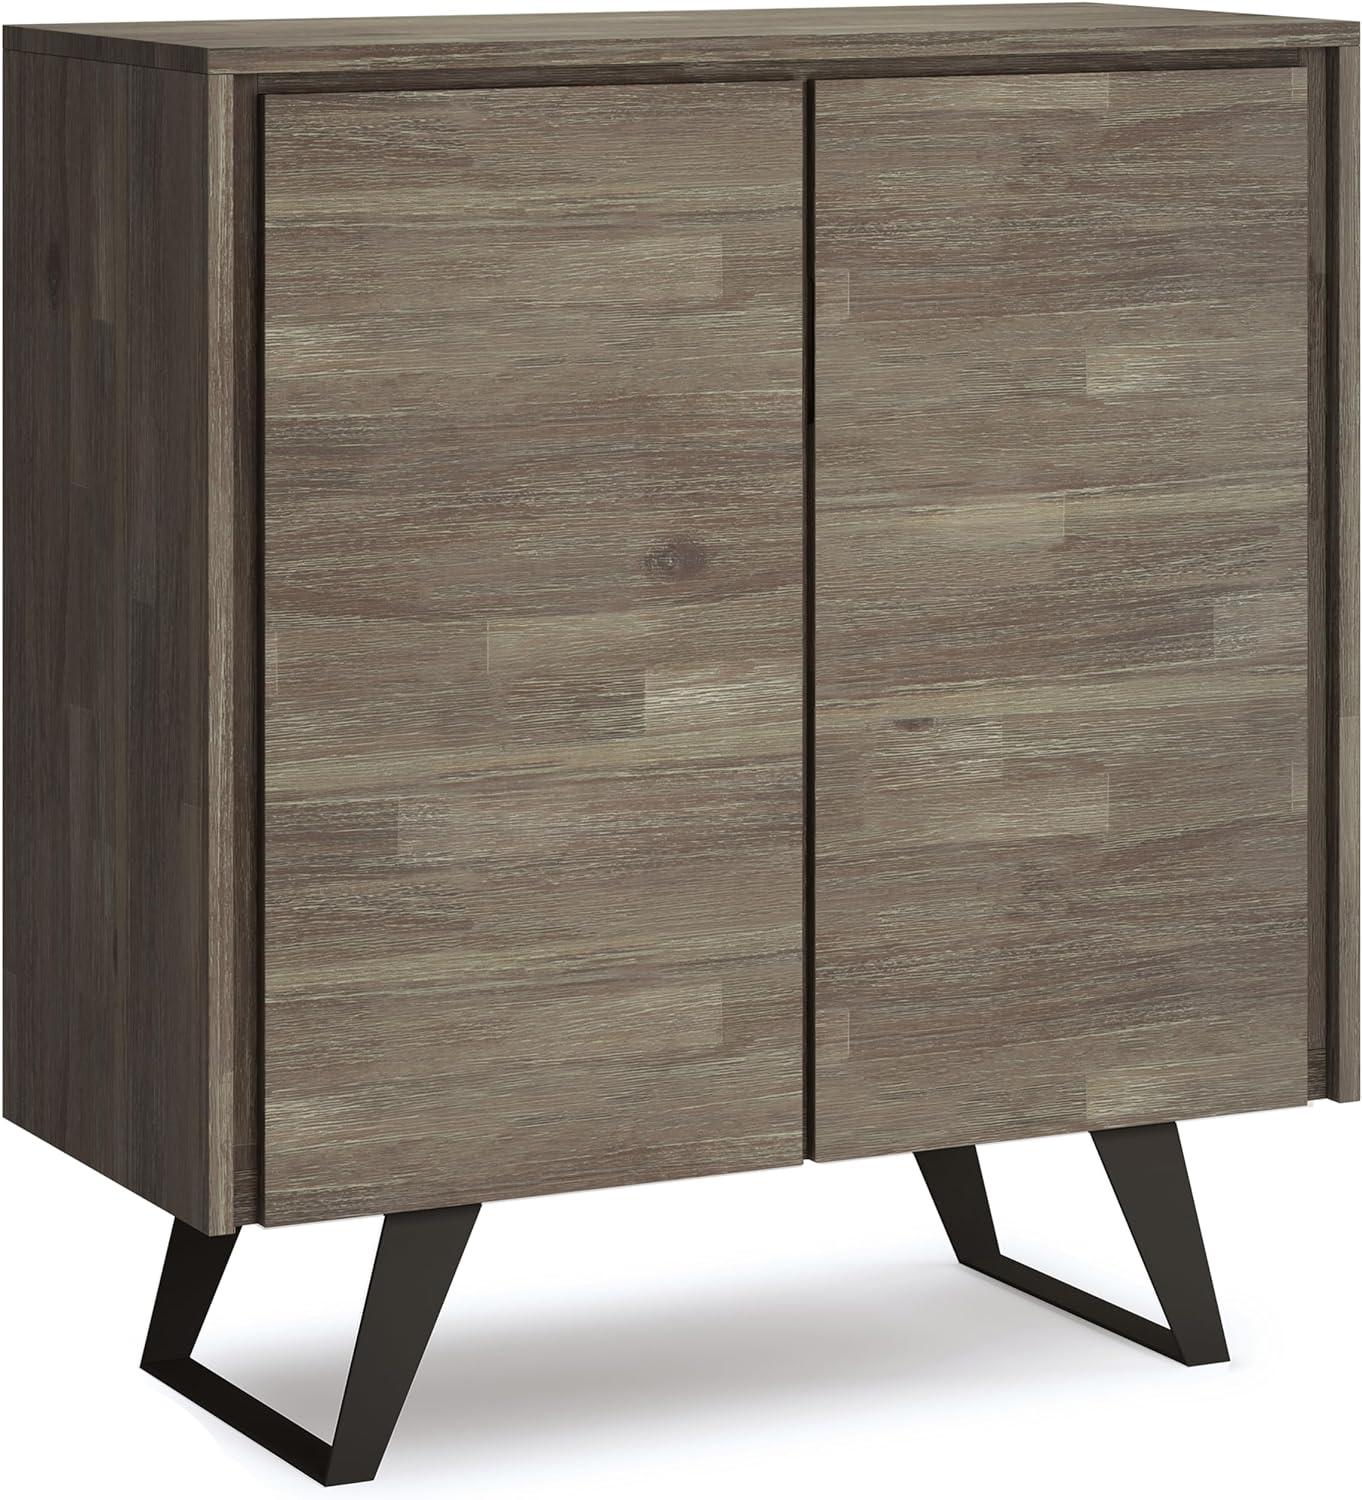 Transitional Distressed Grey Acacia Office Storage Cabinet with Adjustable Shelving